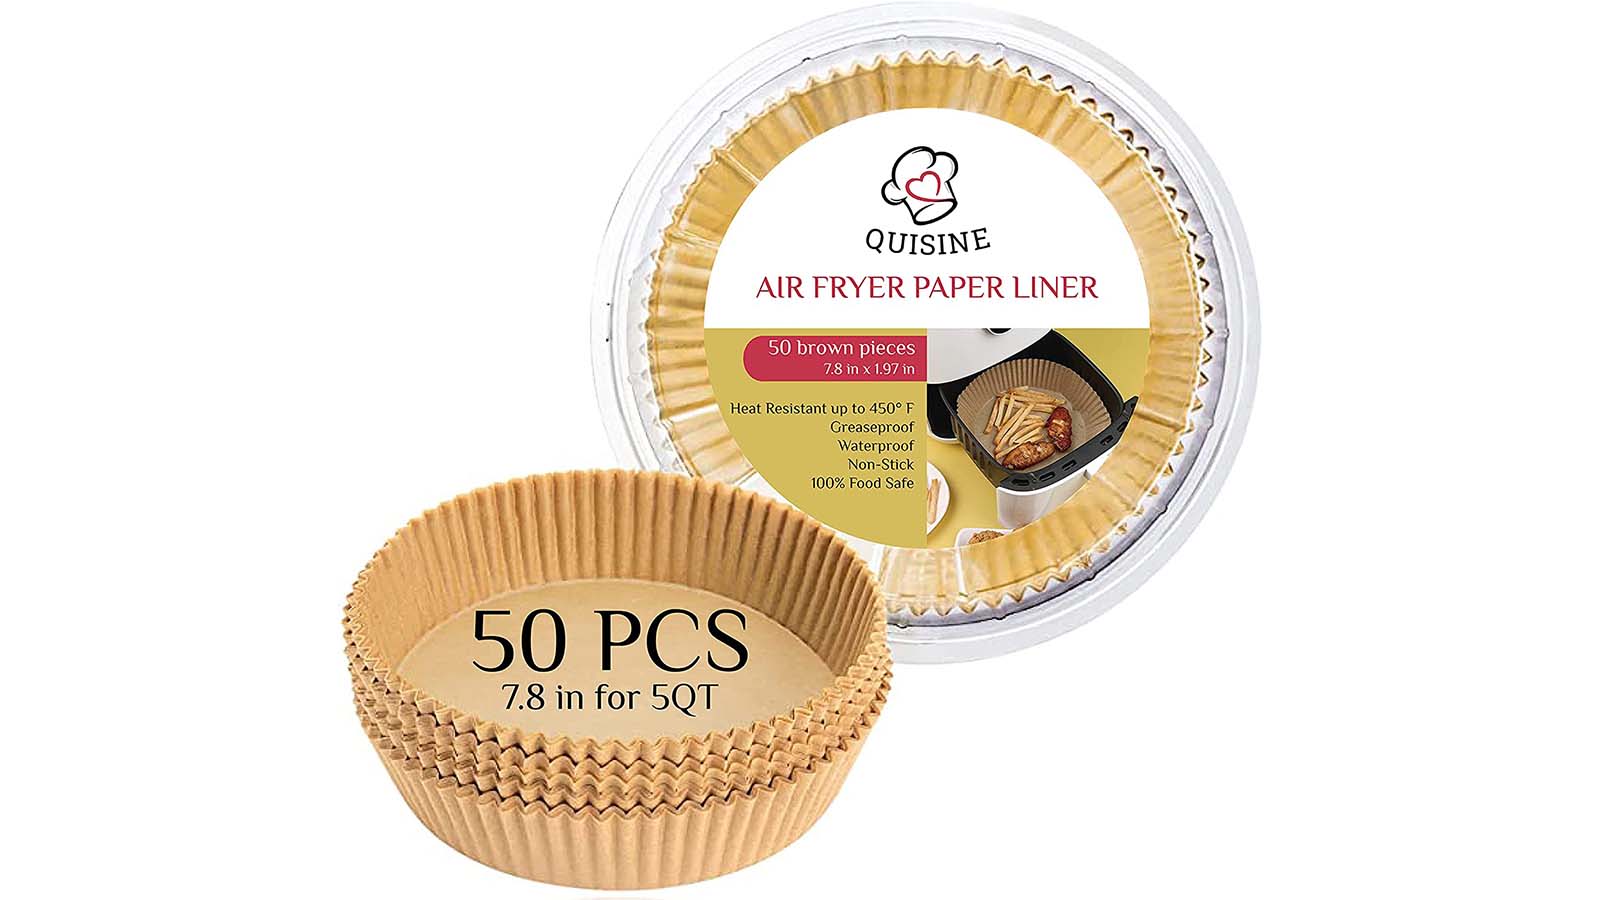 Air Fryer Disposable Paper Liner Airfryer Instant Pot Oven Insert Parchment  Sheets - China Air Fryer Parchment and Parchment Paper Baking Sheets price